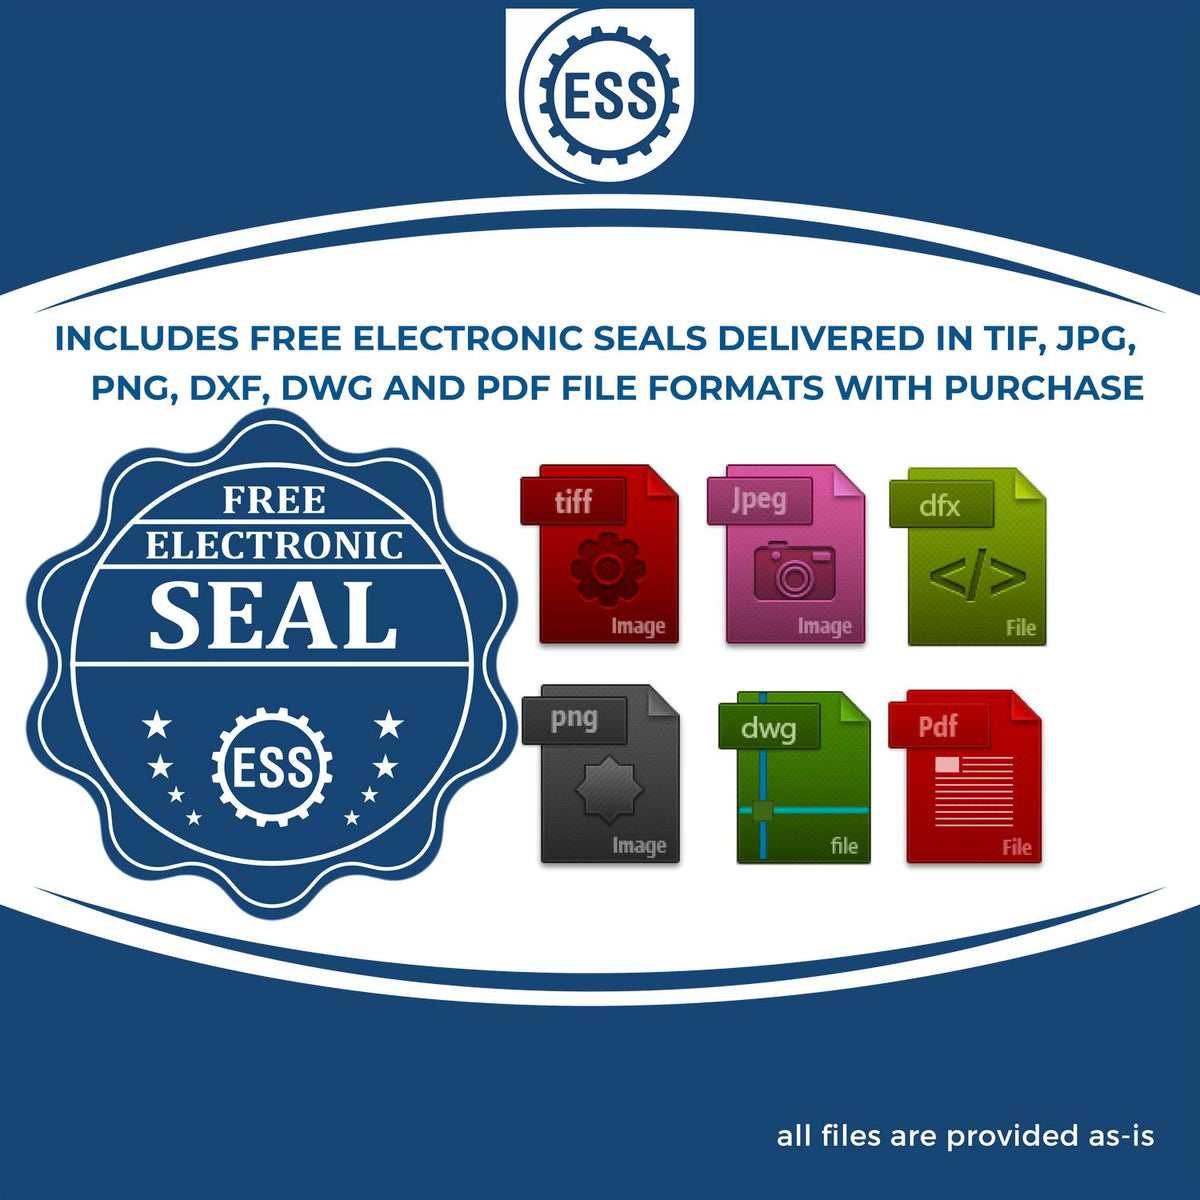 An infographic for the free electronic seal for the Soft Utah Professional Geologist Seal illustrating the different file type icons such as DXF, DWG, TIF, JPG and PNG.